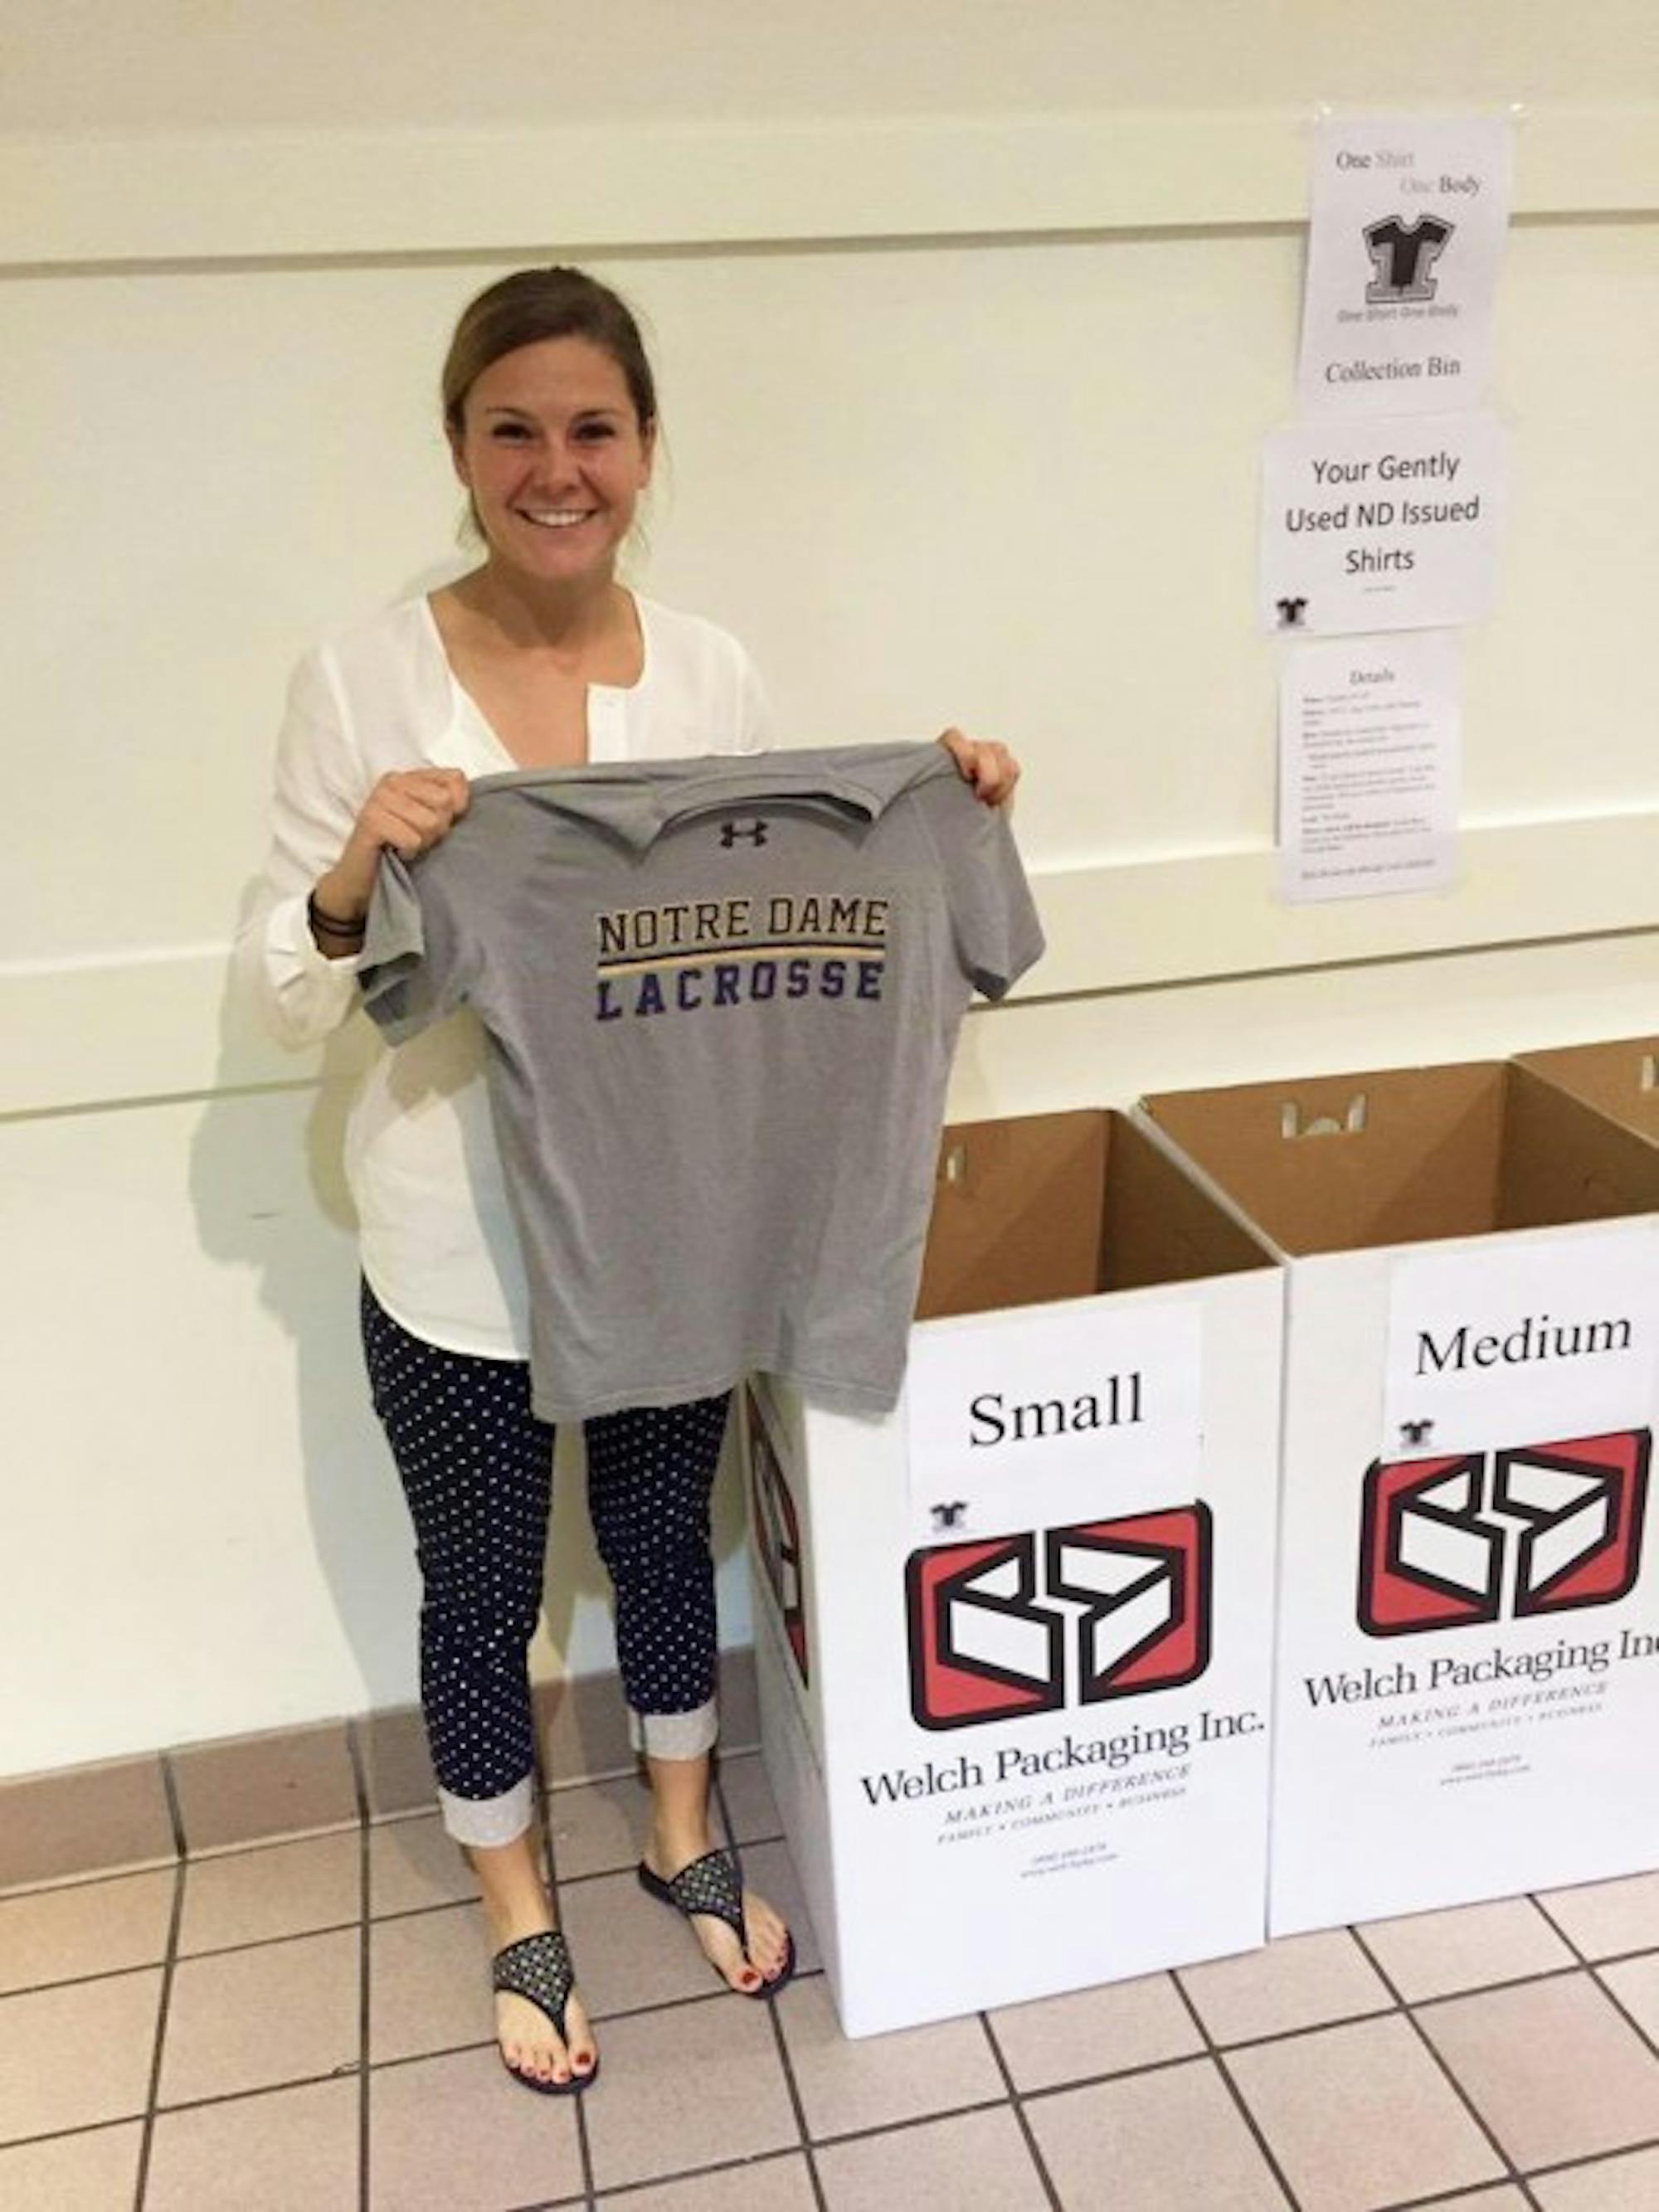 Senior Katherine McManus donates issued lacrosse gear in North Dining Hall for the One Shirt, One Body initiative.